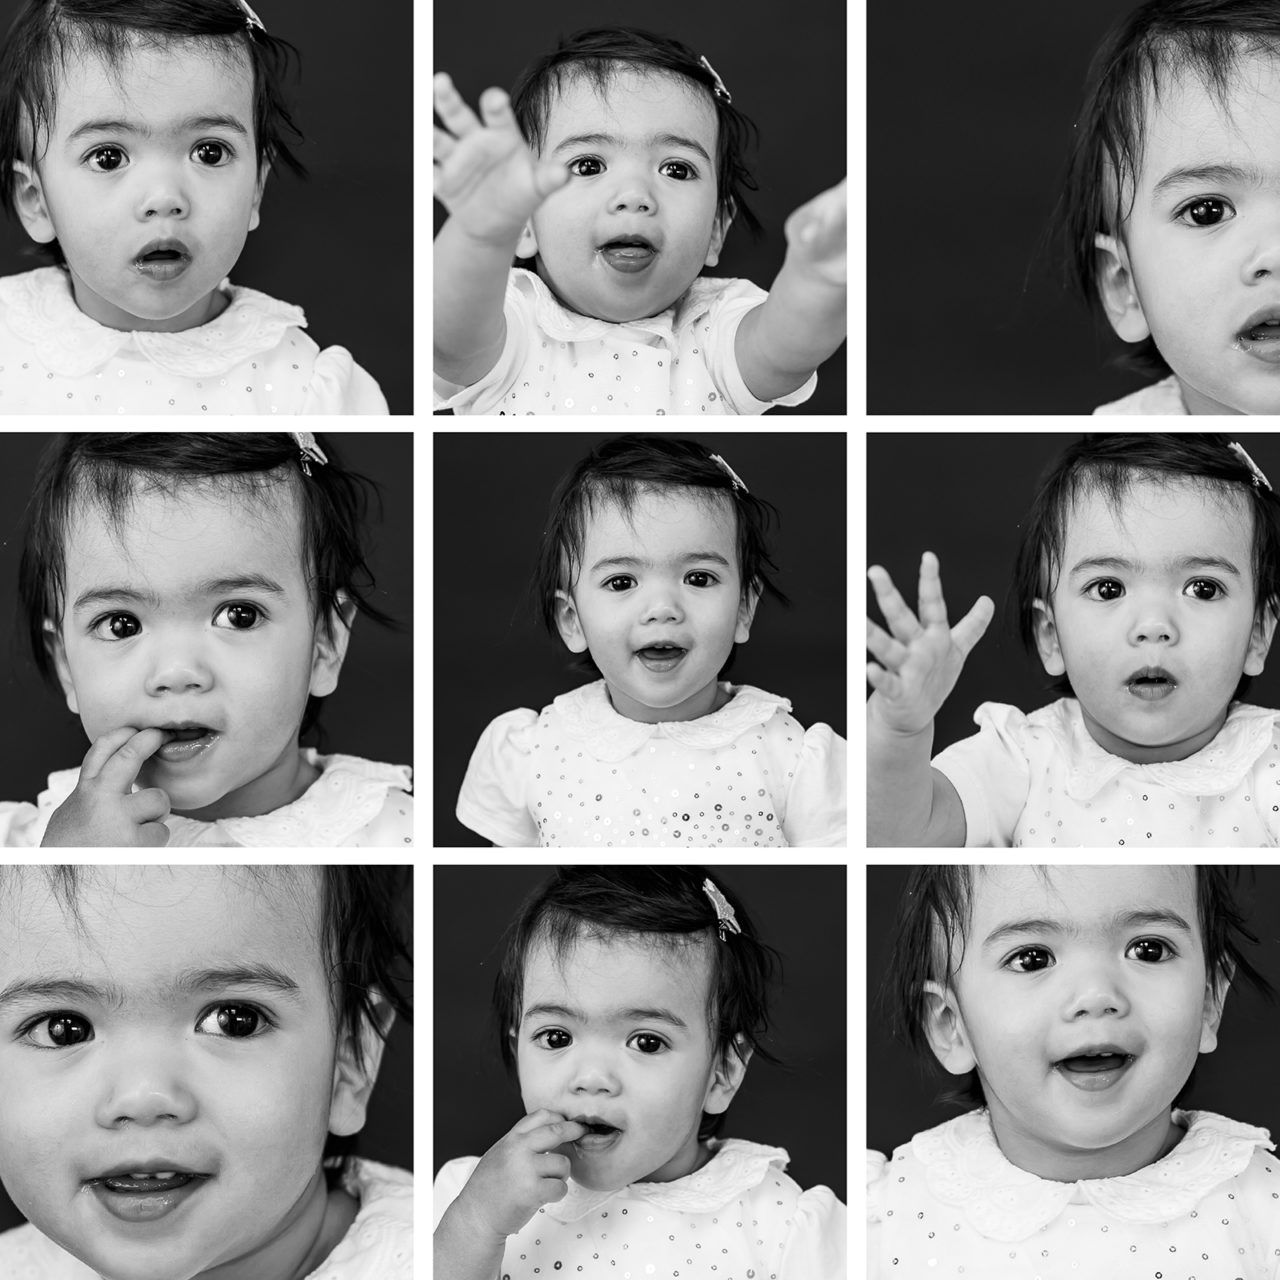 Black & White portrait photos of a baby girl arranged in a grid to showcase her expressions by Paper Bunny Studios